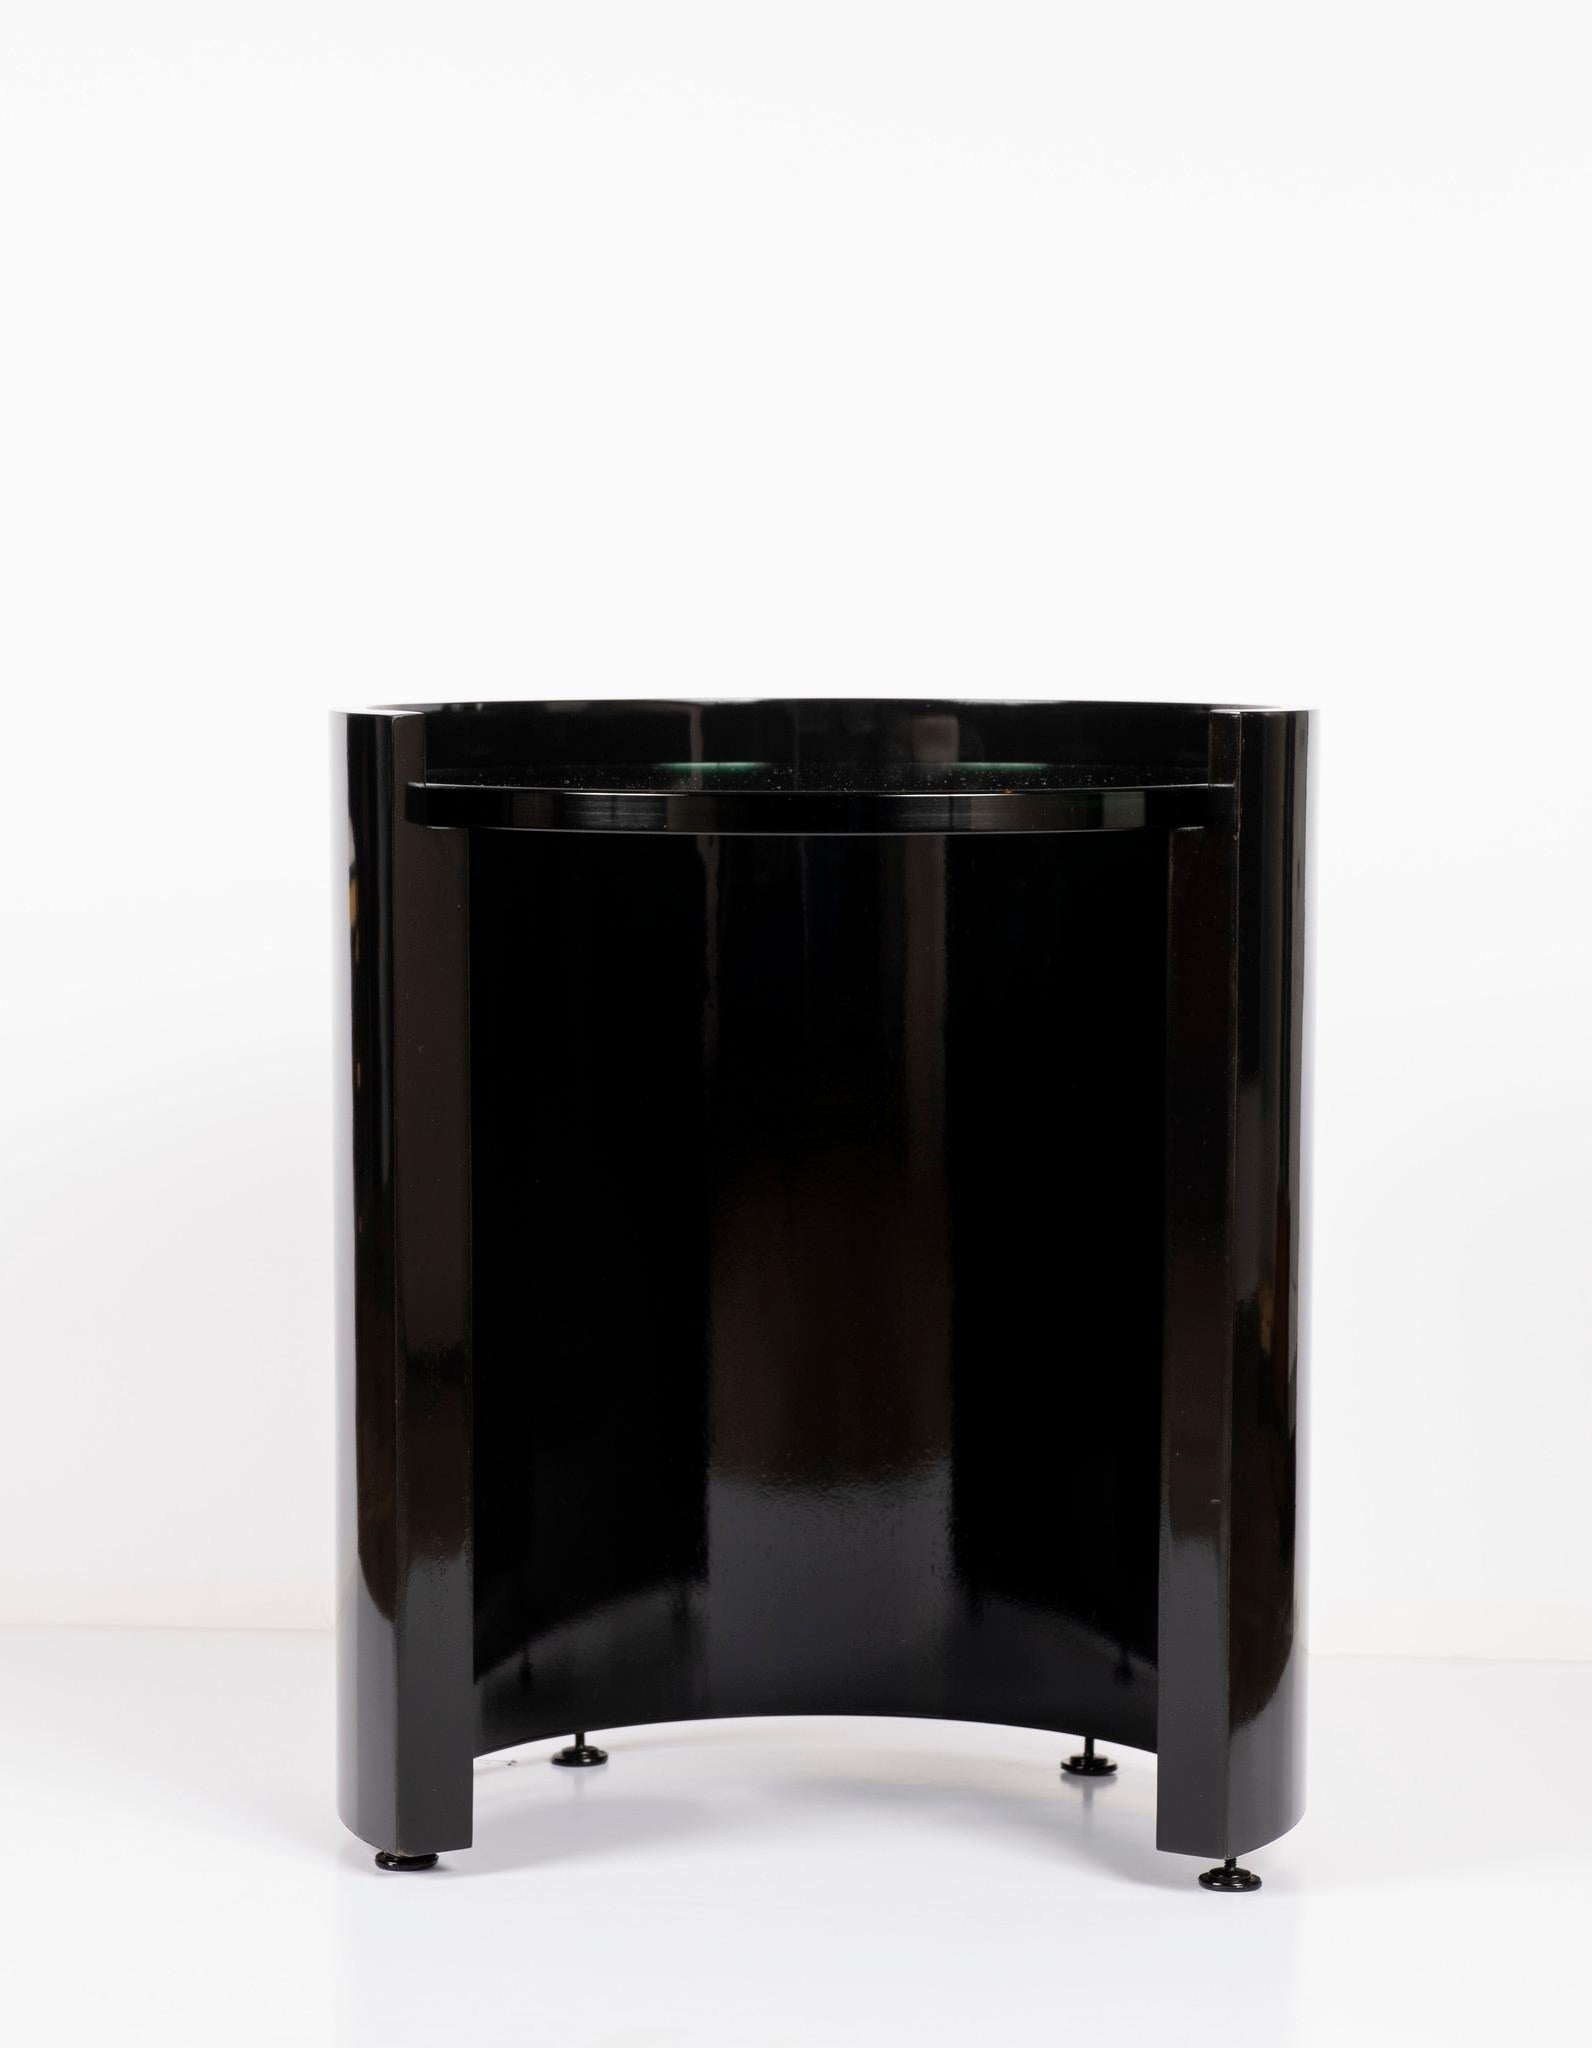 A contemporary and modern bold black lacquered geometric table with 3/4